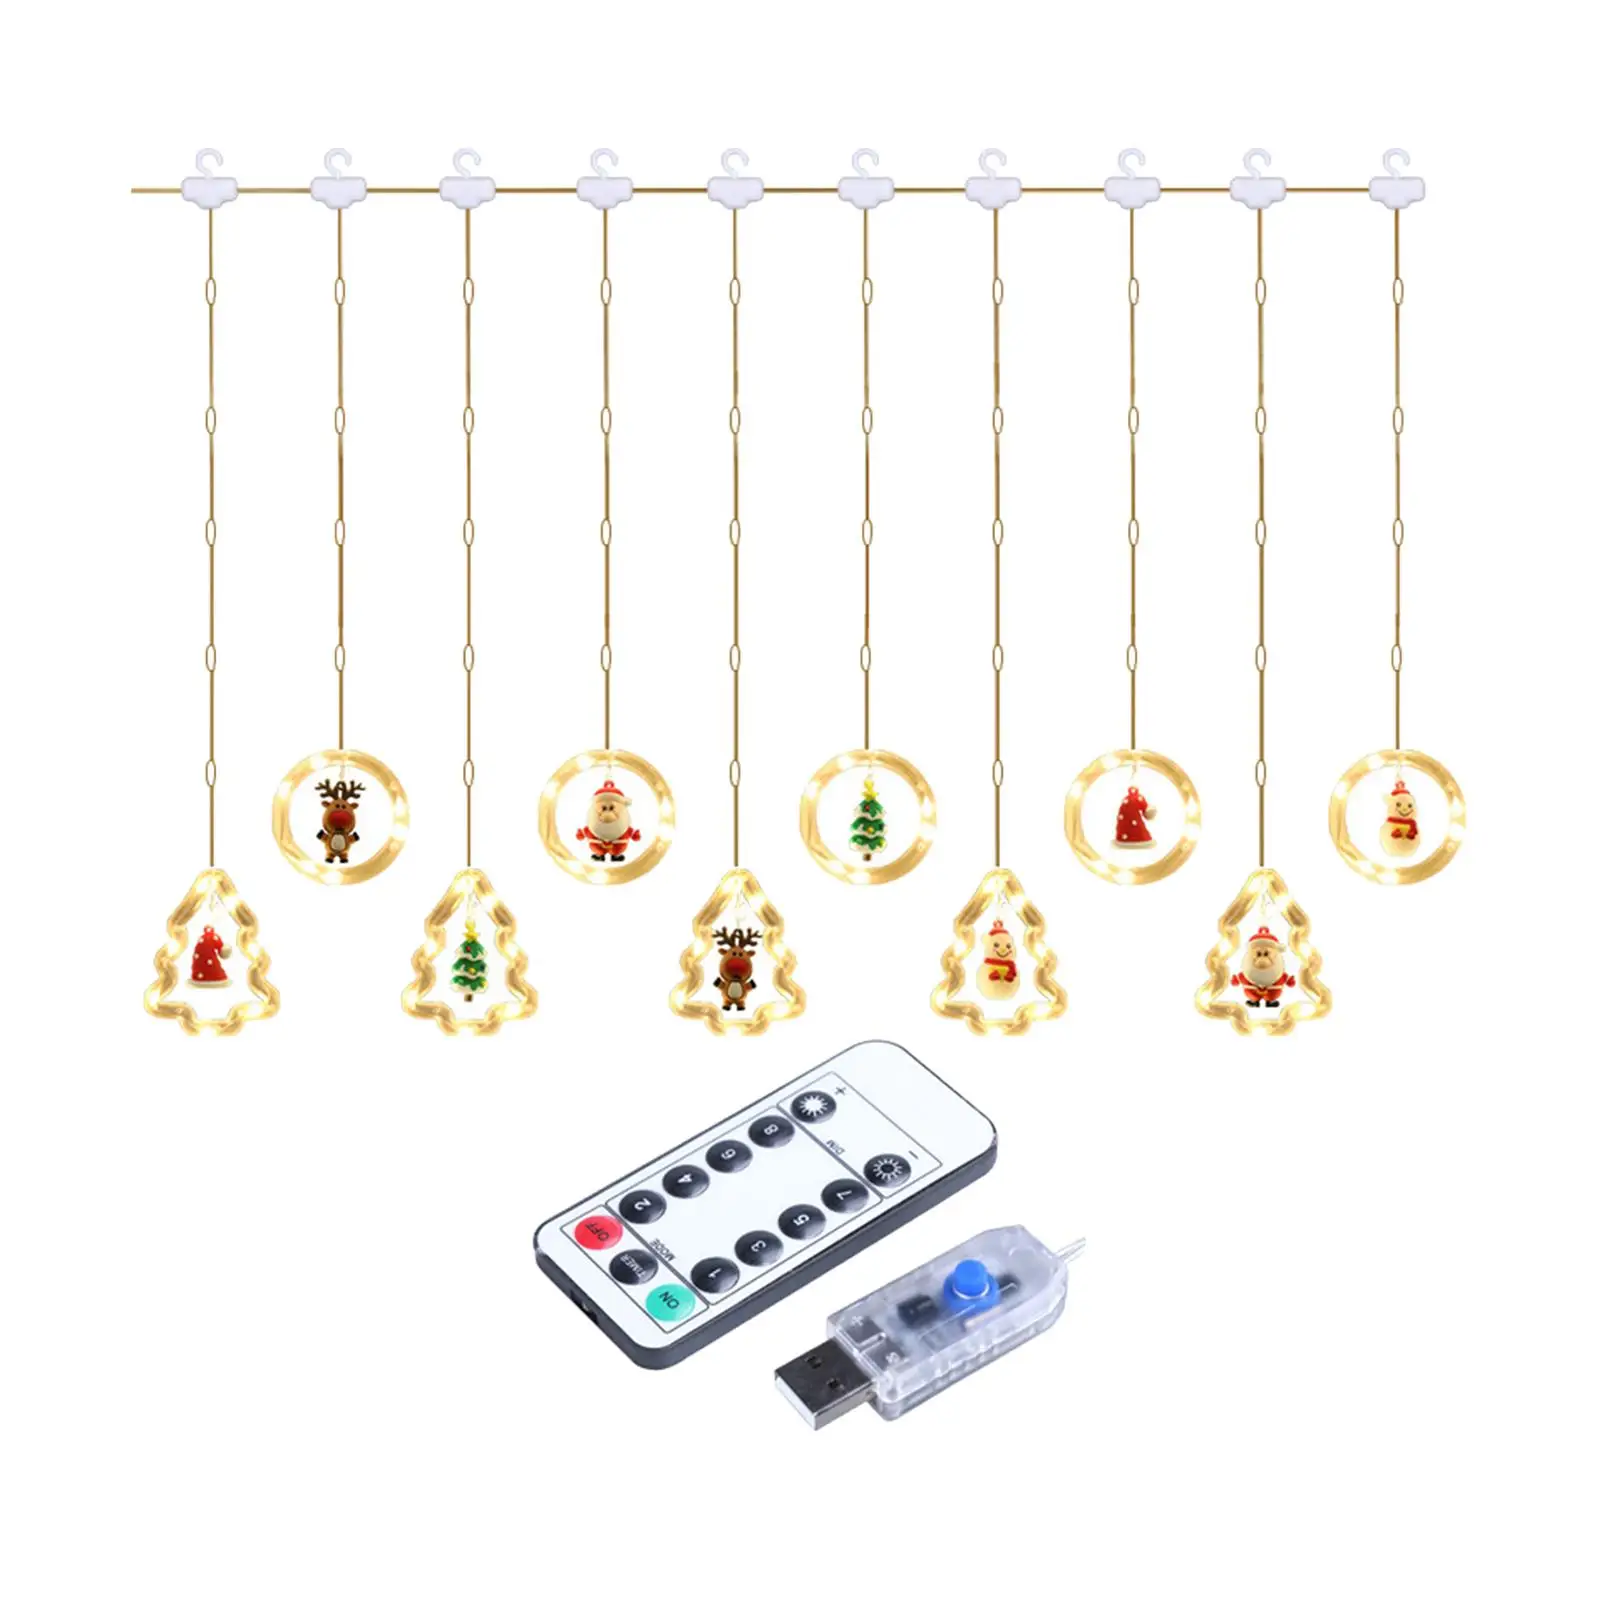 LED Christmas String Light Lighting Ornament Hanging Remote Control for Indoor Party Yard Decoration